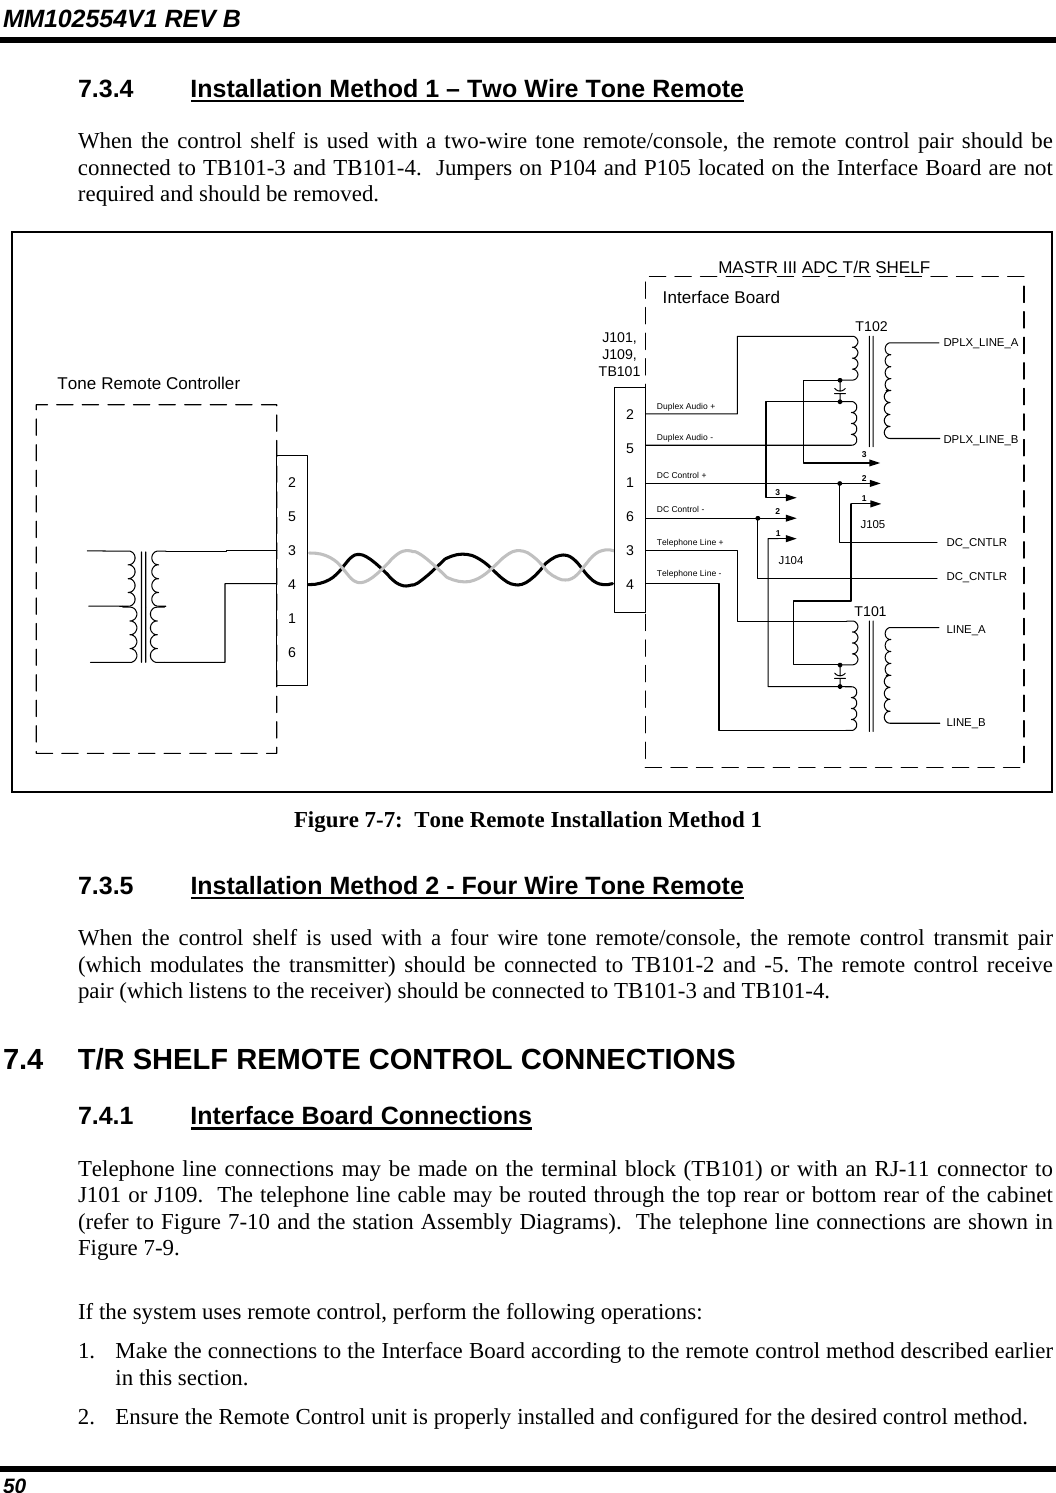 MM102554V1 REV B 50   7.3.4  Installation Method 1 – Two Wire Tone Remote When the control shelf is used with a two-wire tone remote/console, the remote control pair should be connected to TB101-3 and TB101-4.  Jumpers on P104 and P105 located on the Interface Board are not required and should be removed.  J101,J109,TB101253416T101LINE_ALINE_BDC_CNTLRDC_CNTLRTelephone Line +Telephone Line -Tone Remote ControllerMASTR III ADC T/R SHELFInterface BoardDC Control +DC Control -J104123J105123T102 DPLX_LINE_ADPLX_LINE_BDuplex Audio +Duplex Audio -251634 Figure 7-7:  Tone Remote Installation Method 1 7.3.5  Installation Method 2 - Four Wire Tone Remote When the control shelf is used with a four wire tone remote/console, the remote control transmit pair (which modulates the transmitter) should be connected to TB101-2 and -5. The remote control receive pair (which listens to the receiver) should be connected to TB101-3 and TB101-4.  7.4  T/R SHELF REMOTE CONTROL CONNECTIONS 7.4.1  Interface Board Connections Telephone line connections may be made on the terminal block (TB101) or with an RJ-11 connector to J101 or J109.  The telephone line cable may be routed through the top rear or bottom rear of the cabinet (refer to Figure 7-10 and the station Assembly Diagrams).  The telephone line connections are shown in Figure 7-9. If the system uses remote control, perform the following operations: 1. Make the connections to the Interface Board according to the remote control method described earlier in this section.   2. Ensure the Remote Control unit is properly installed and configured for the desired control method. 